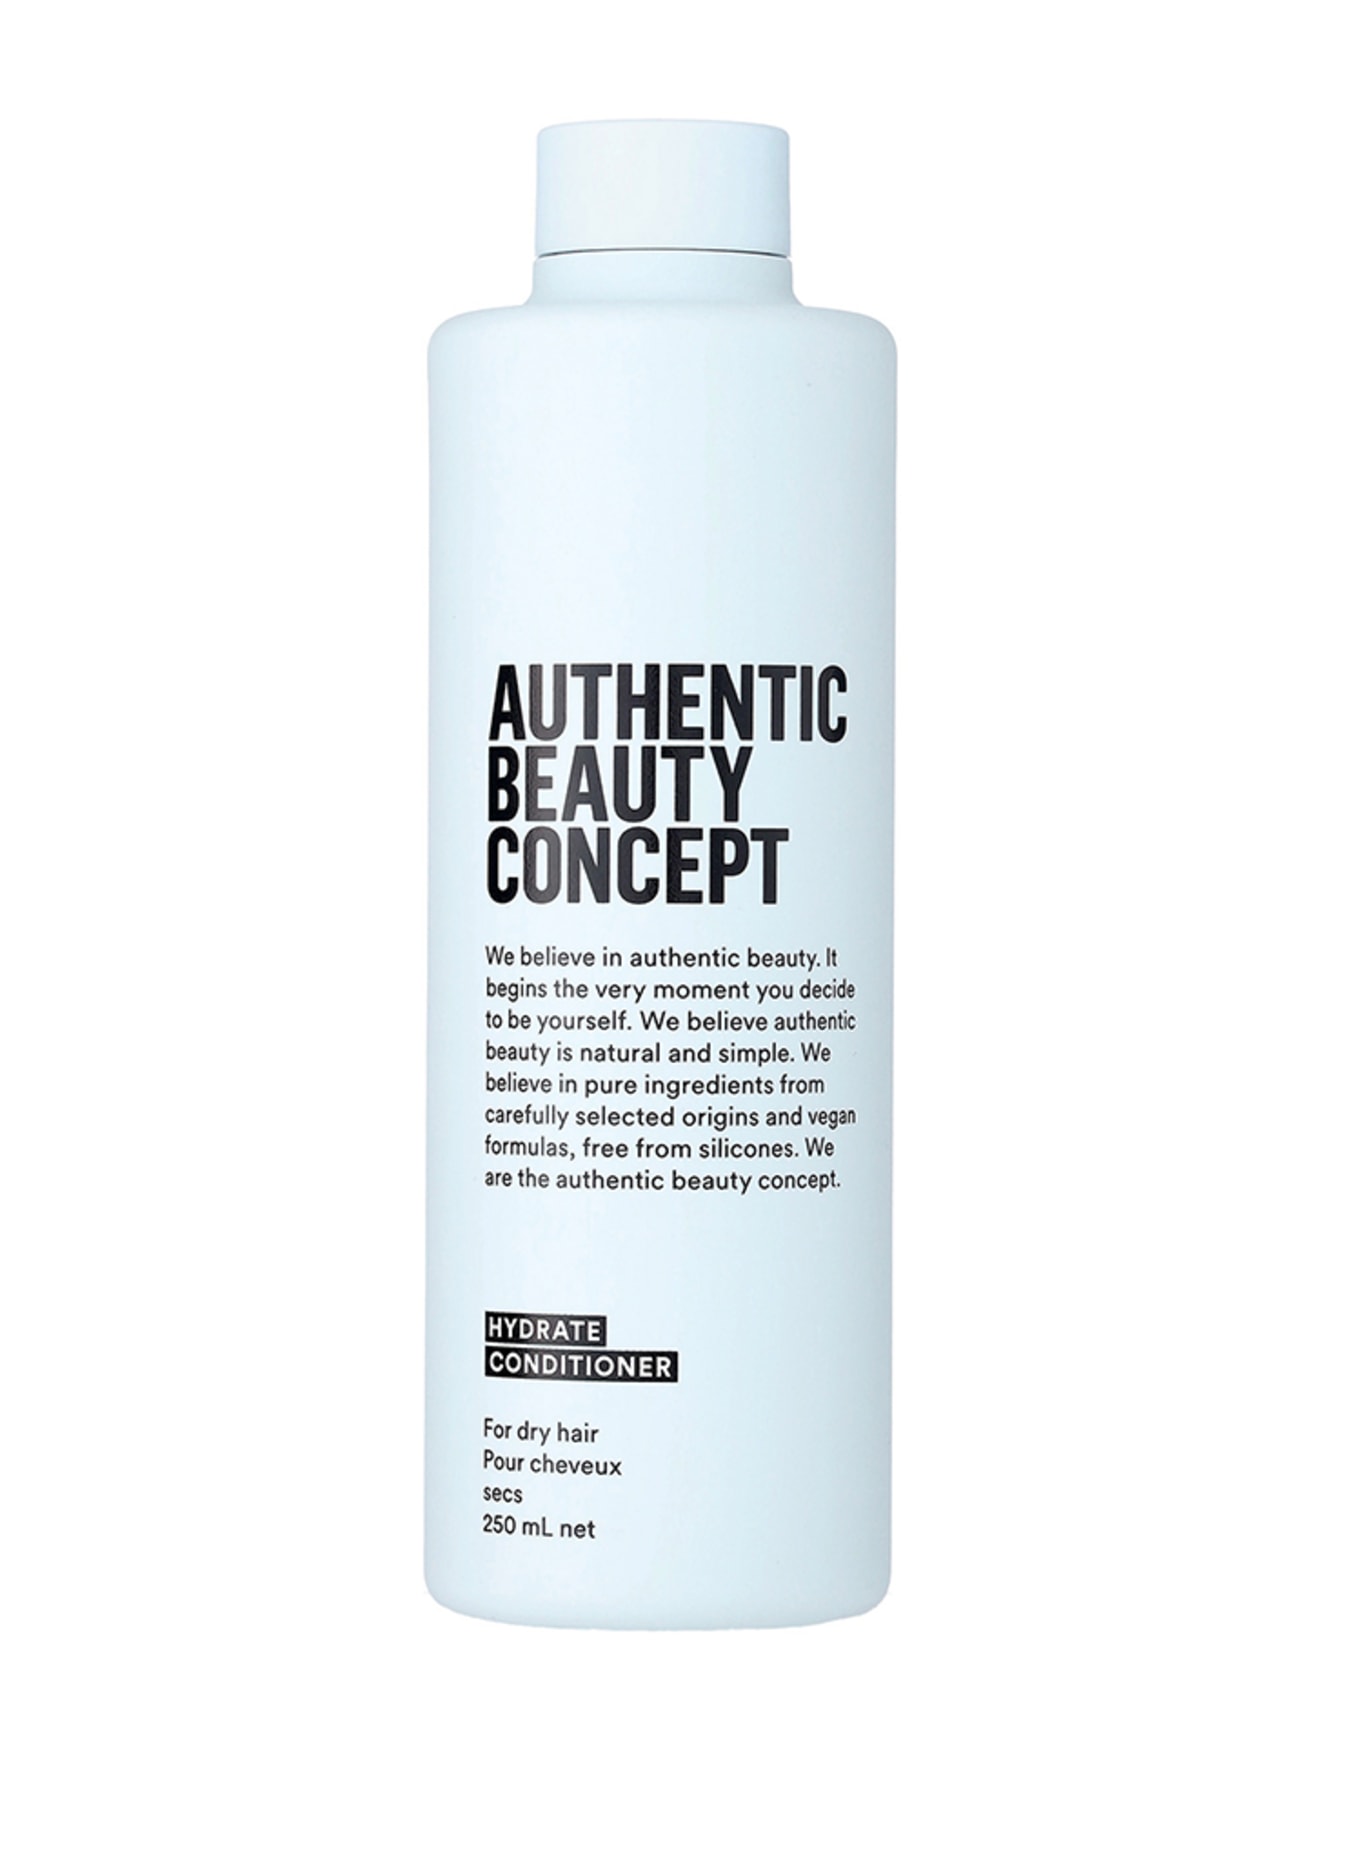 AUTHENTIC BEAUTY CONCEPT HYDRATE CONDITIONER (Obrázek 1)